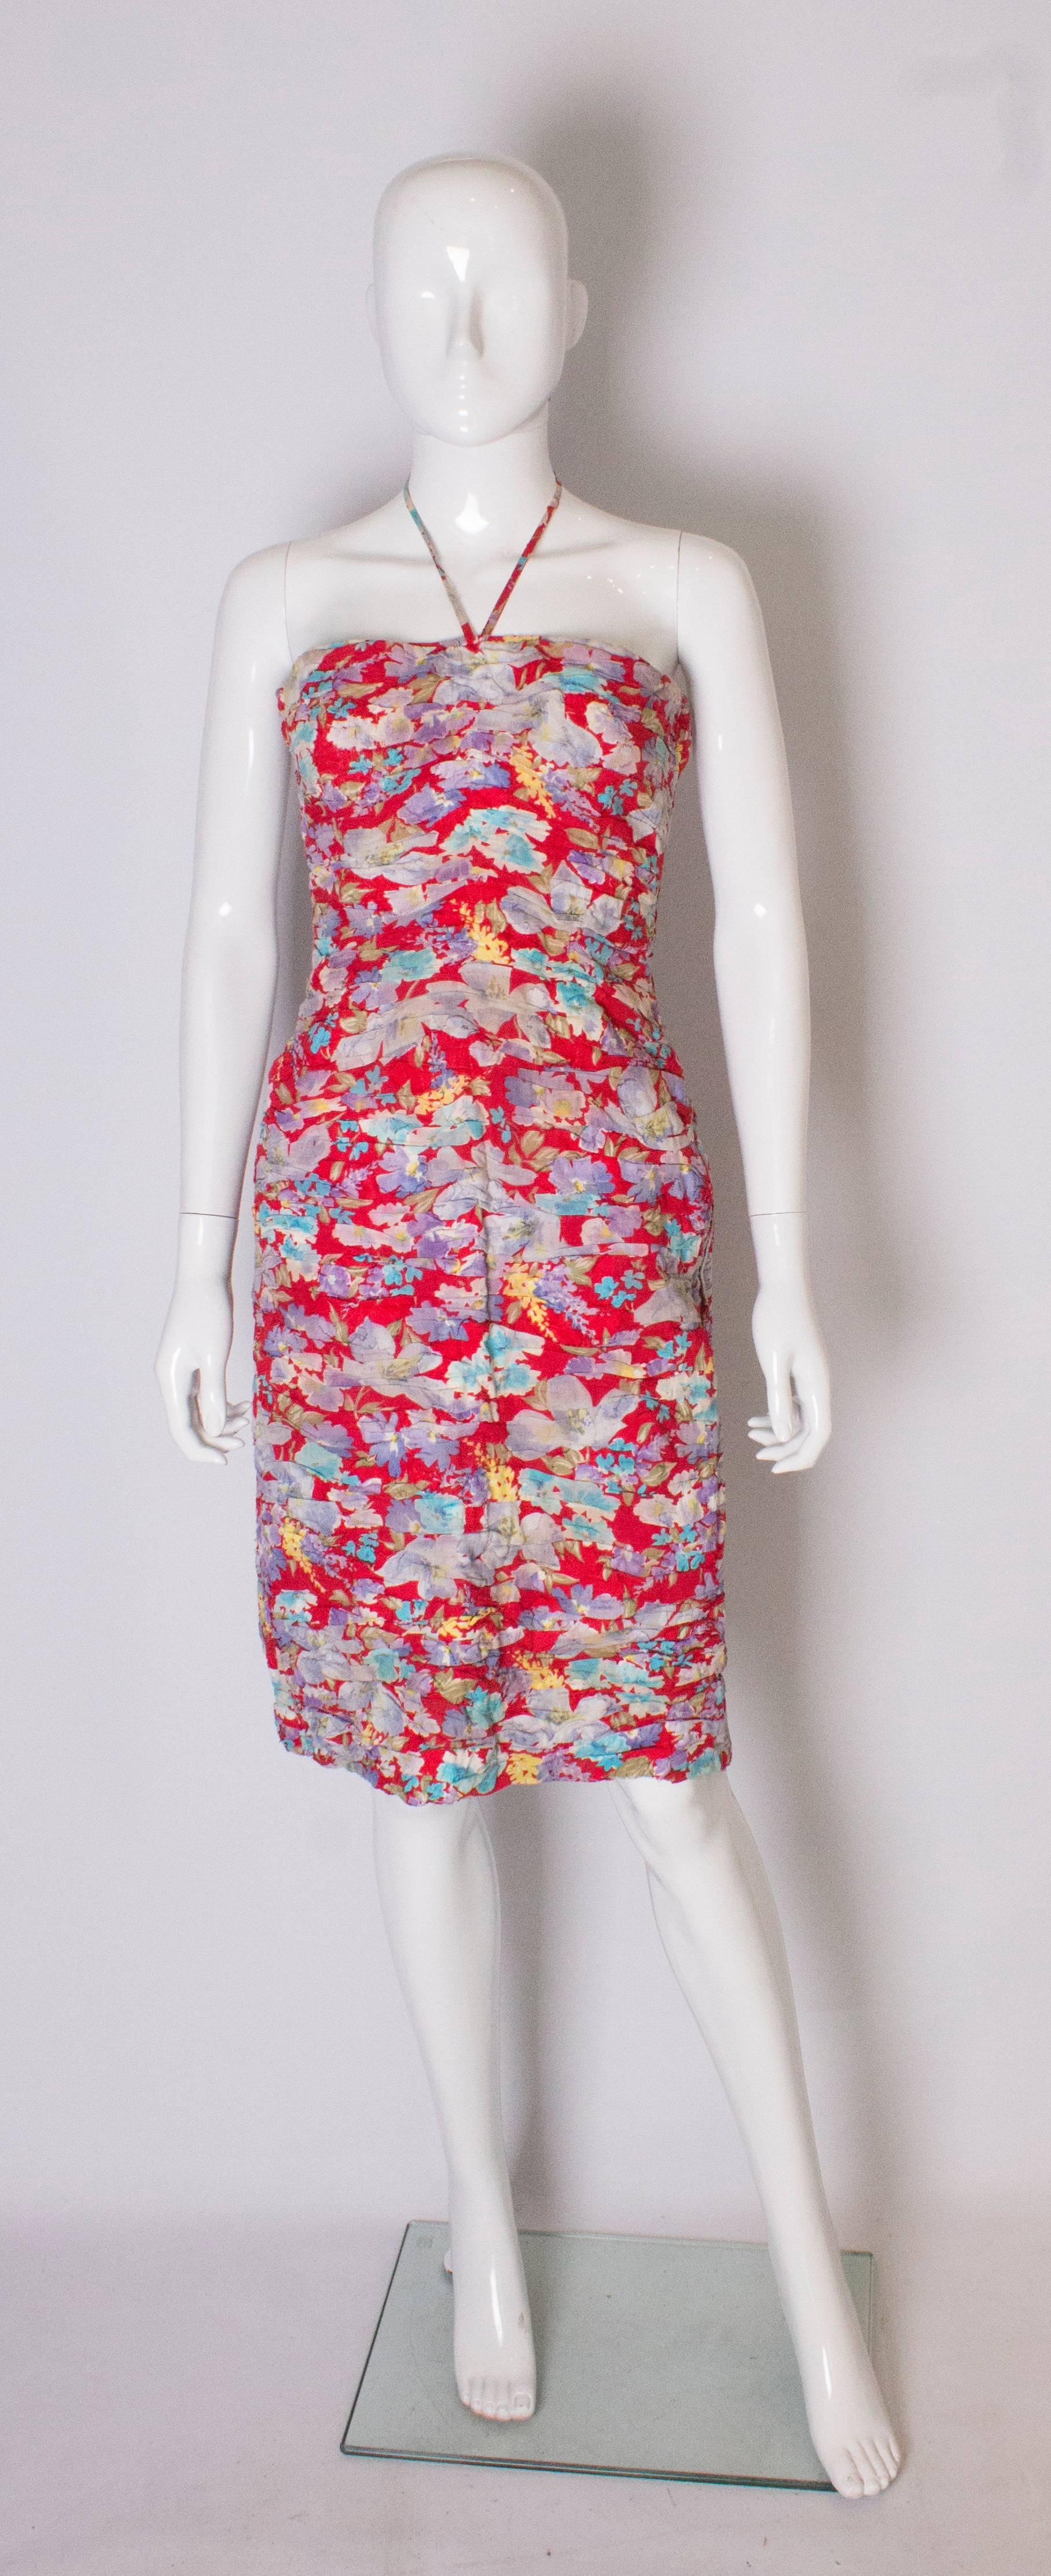 A super sundress for Summer. The dress is in a red fabric with a floral desgin. The dress has gathering over the bust  area, and a halter neck.